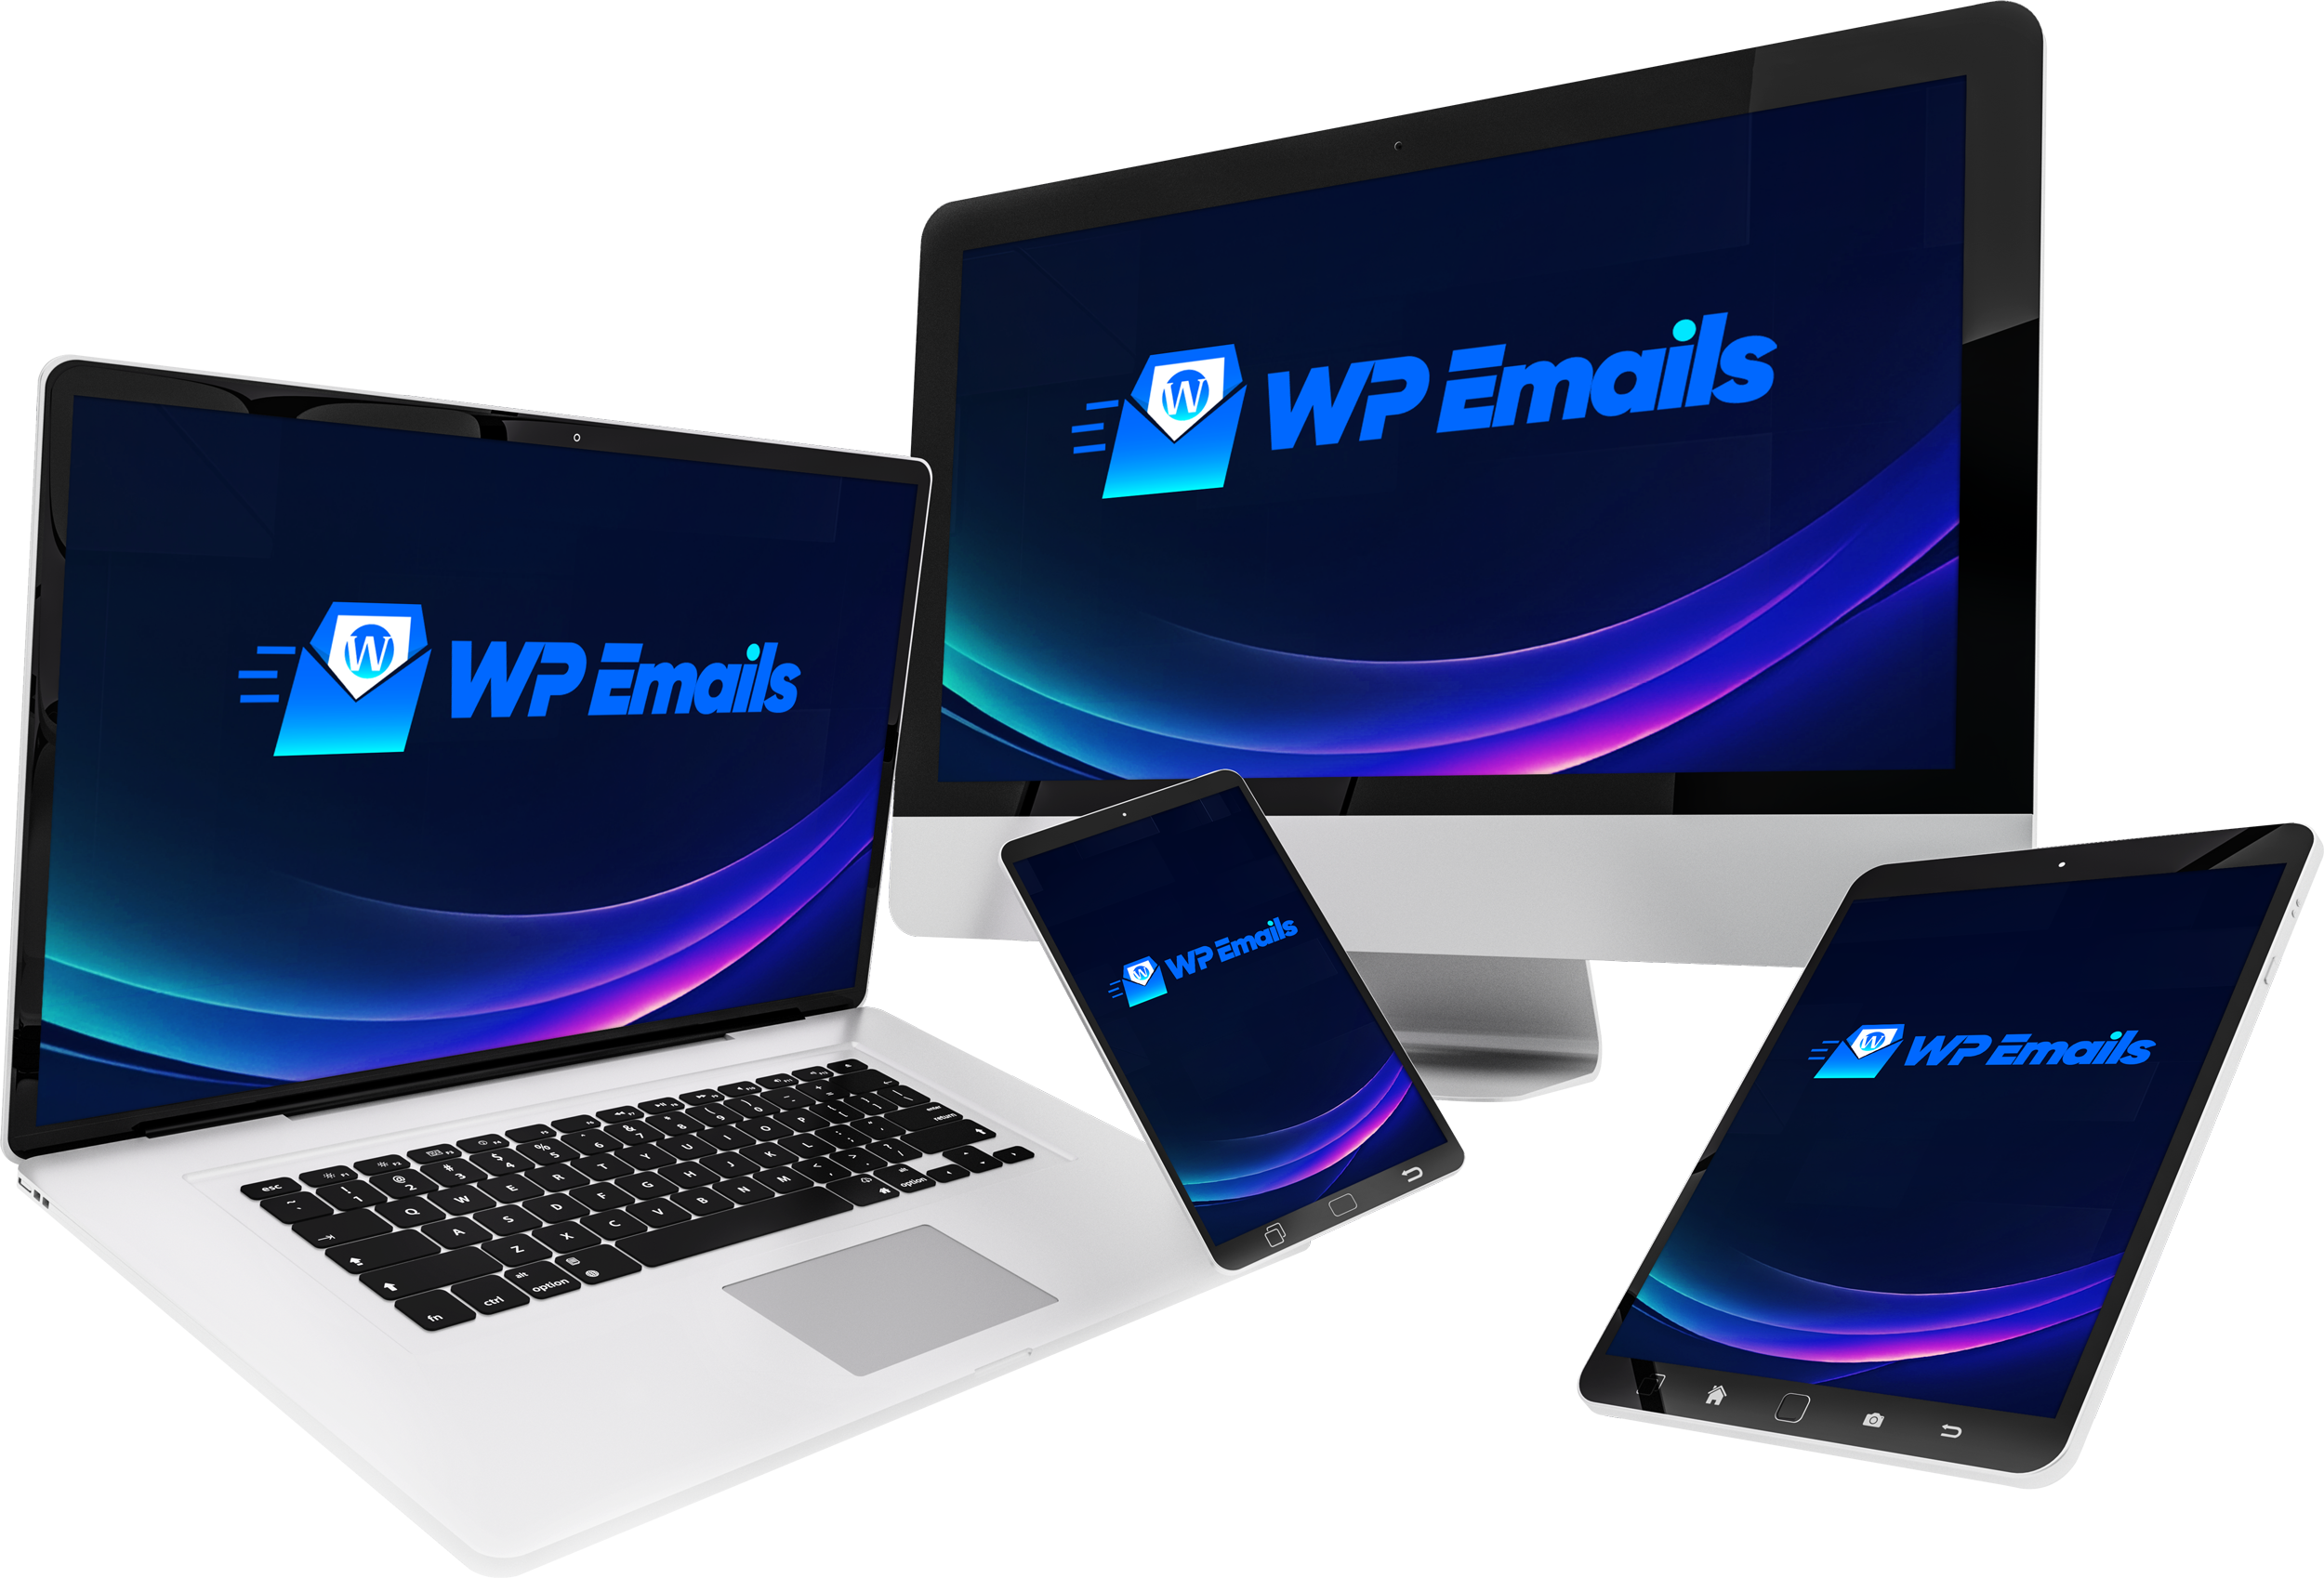 WP Emails